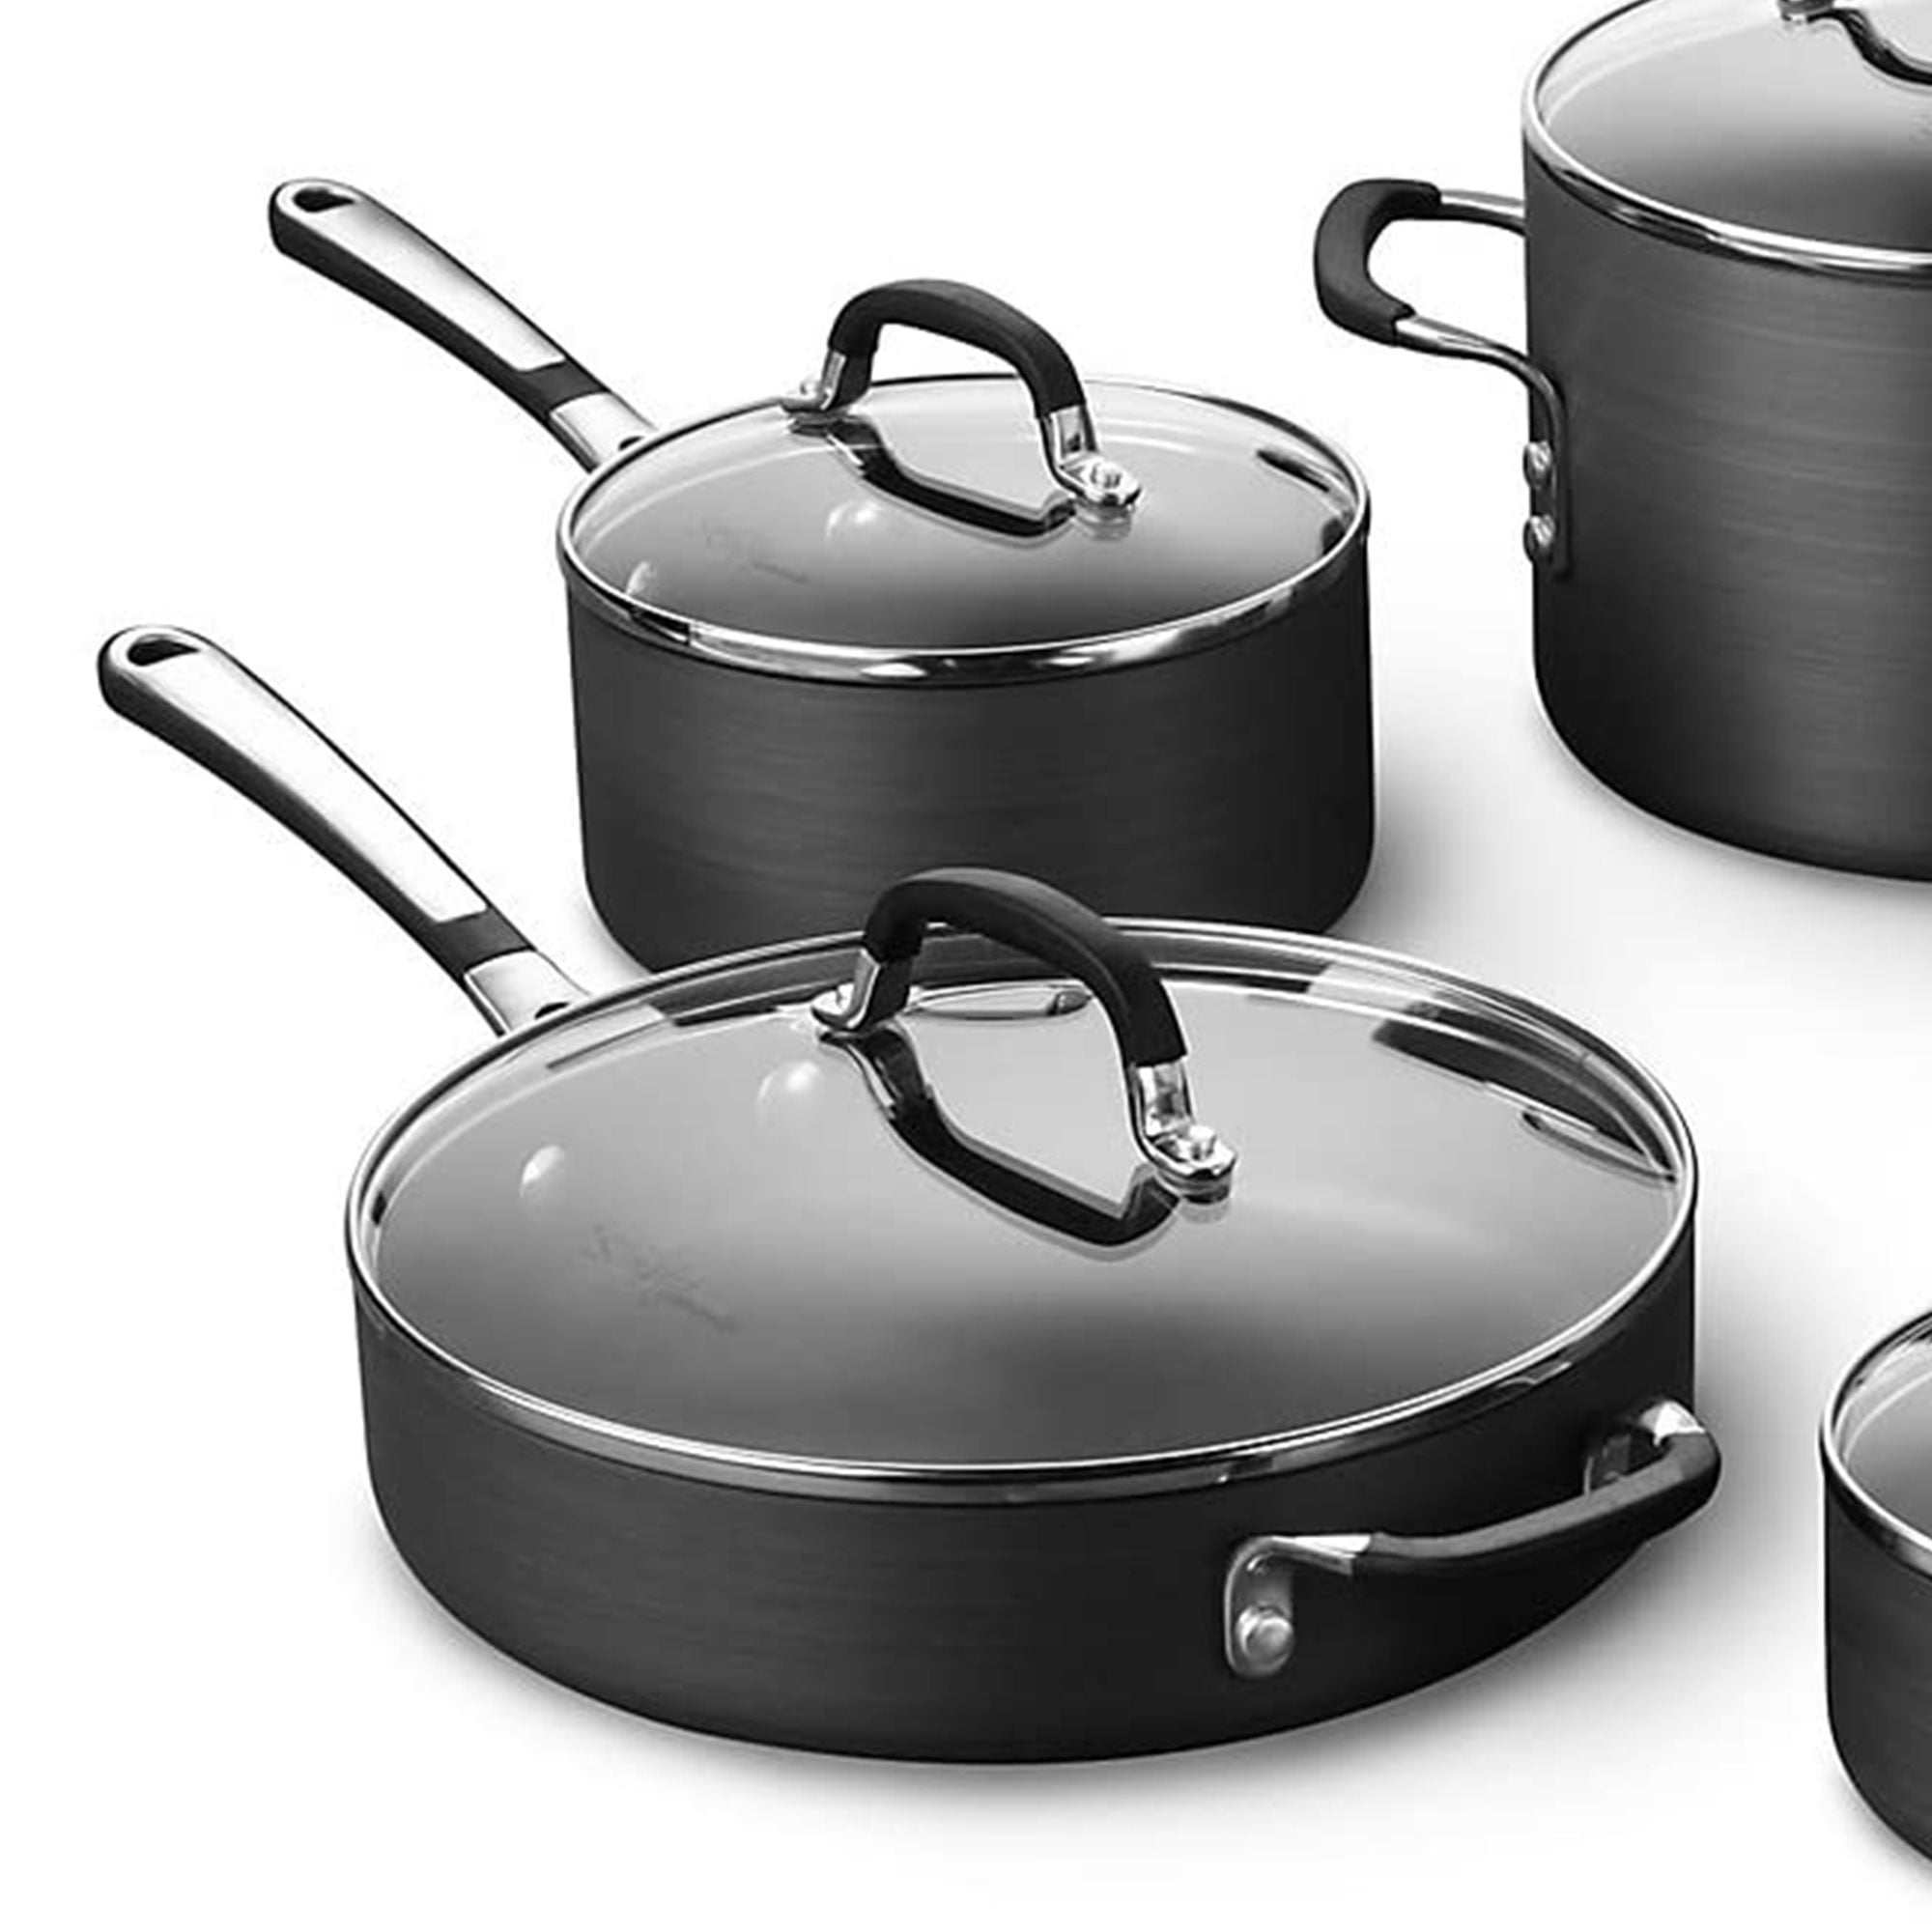 Calphalon cookware on sale: Save $230 on this nesting 10-piece set